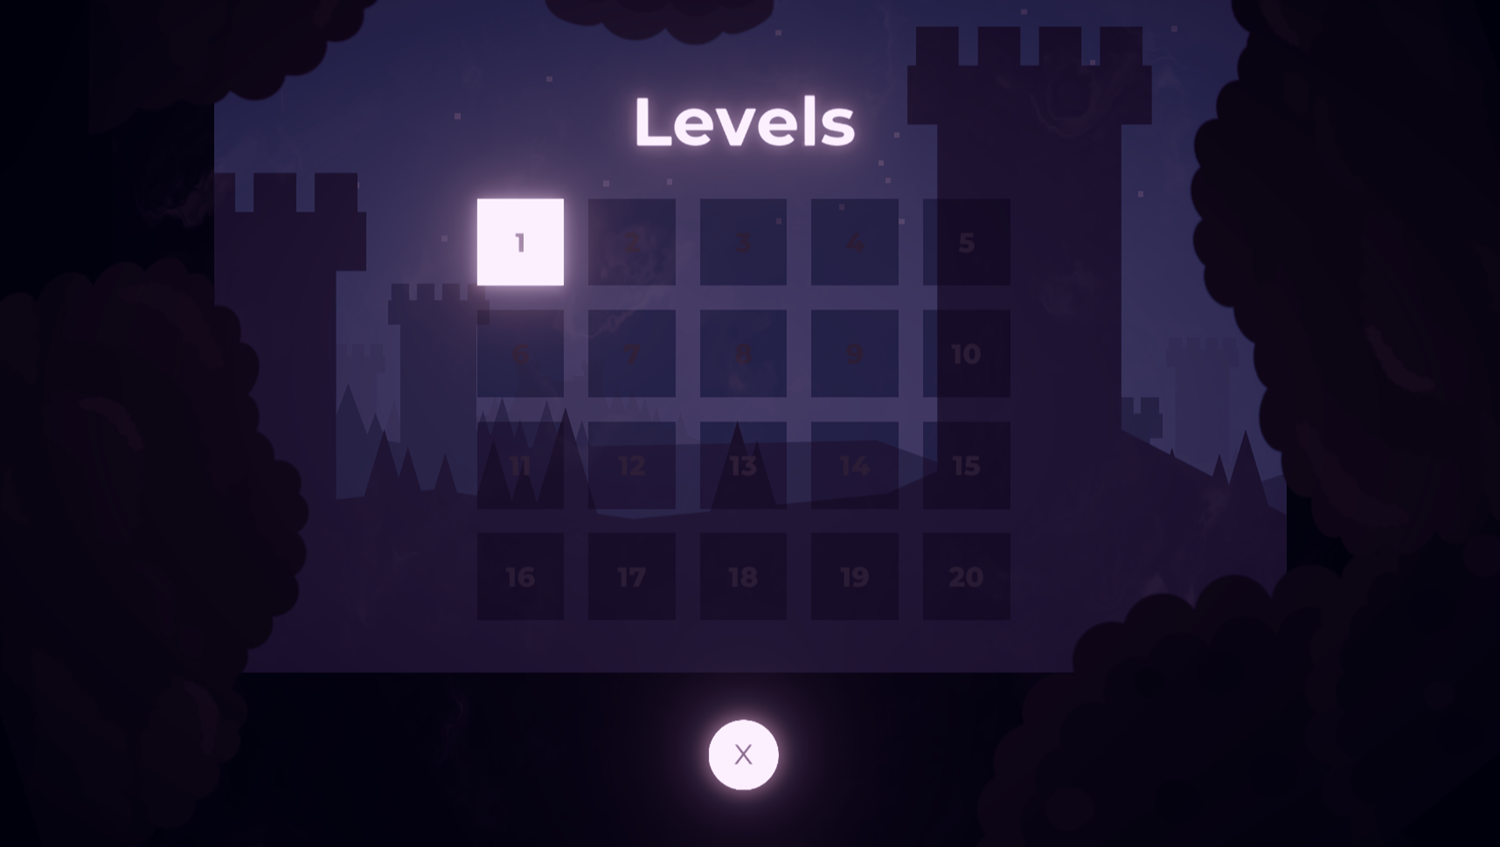 The Mage Game Level Select Screenshot.